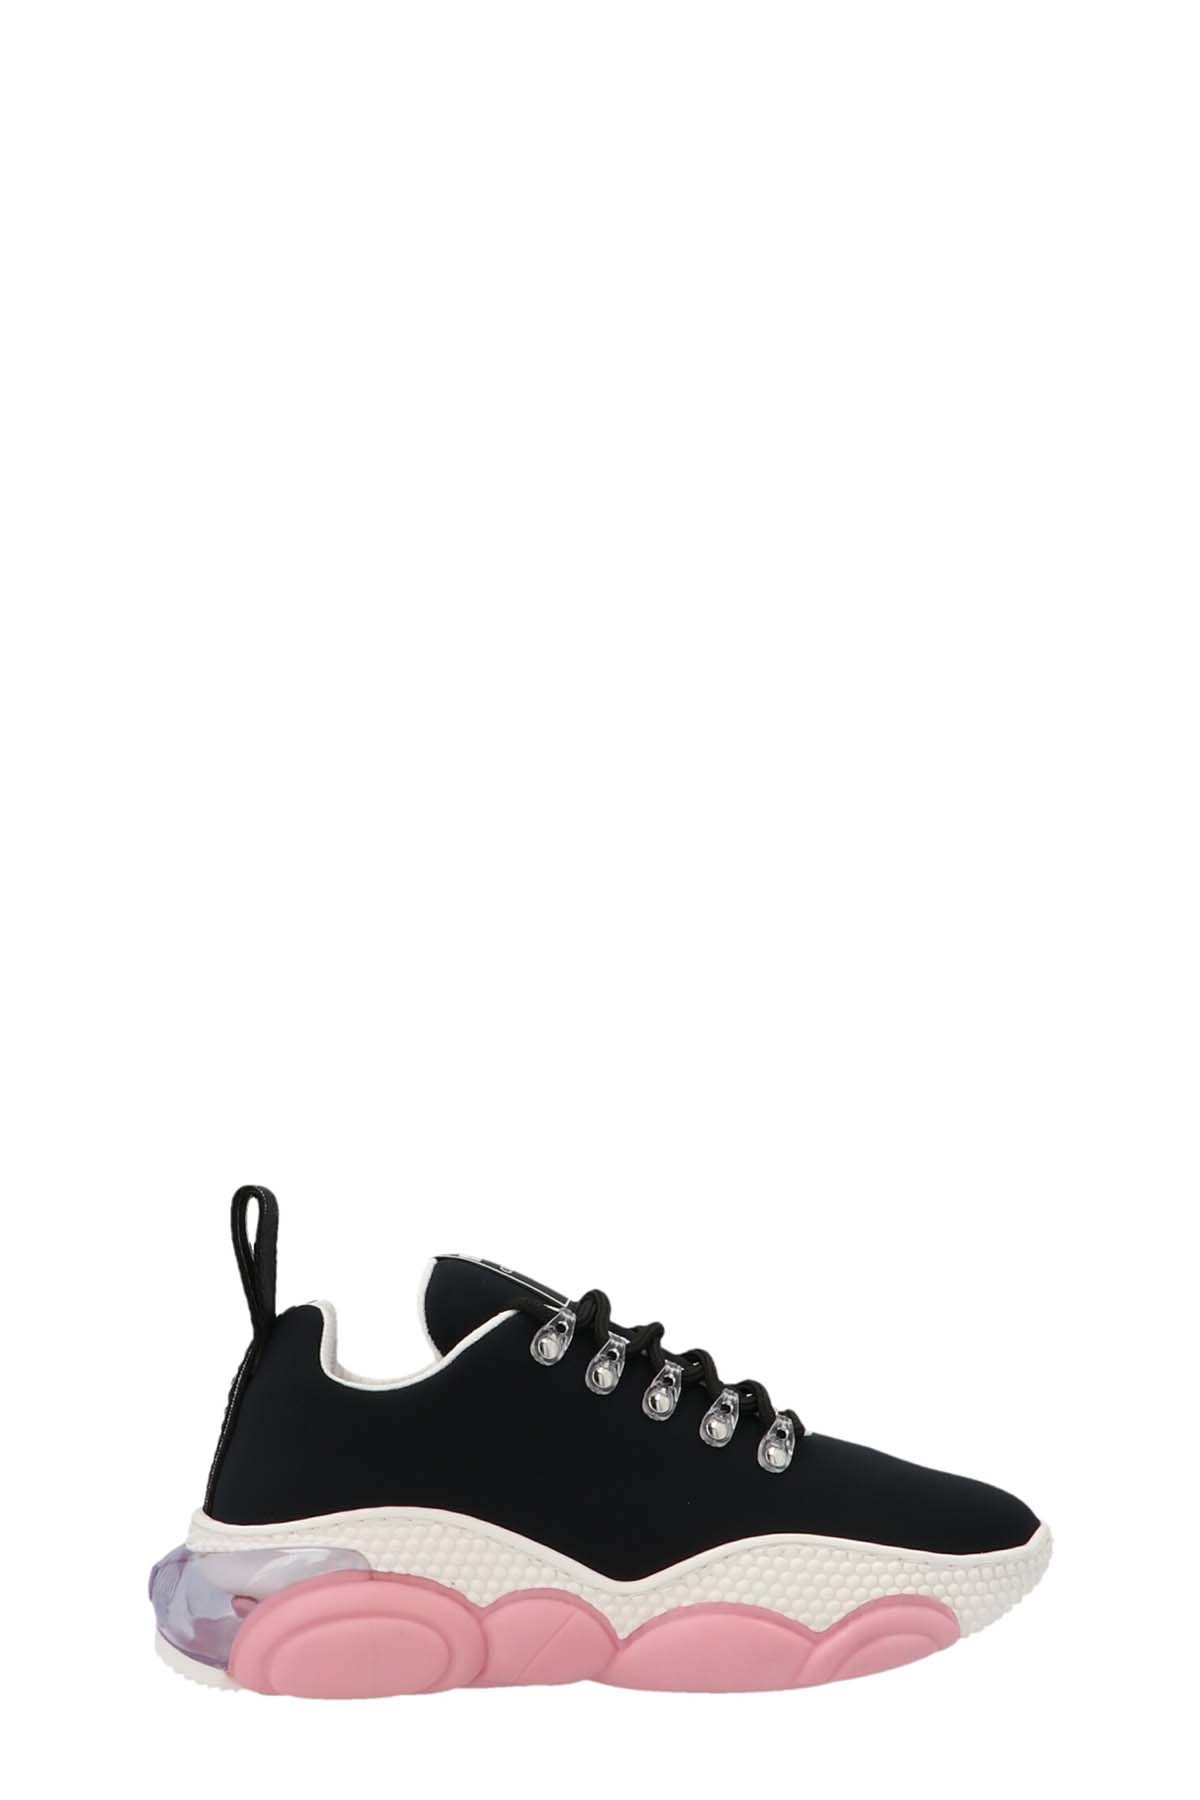 MOSCHINO Sneakers 'Teddy'